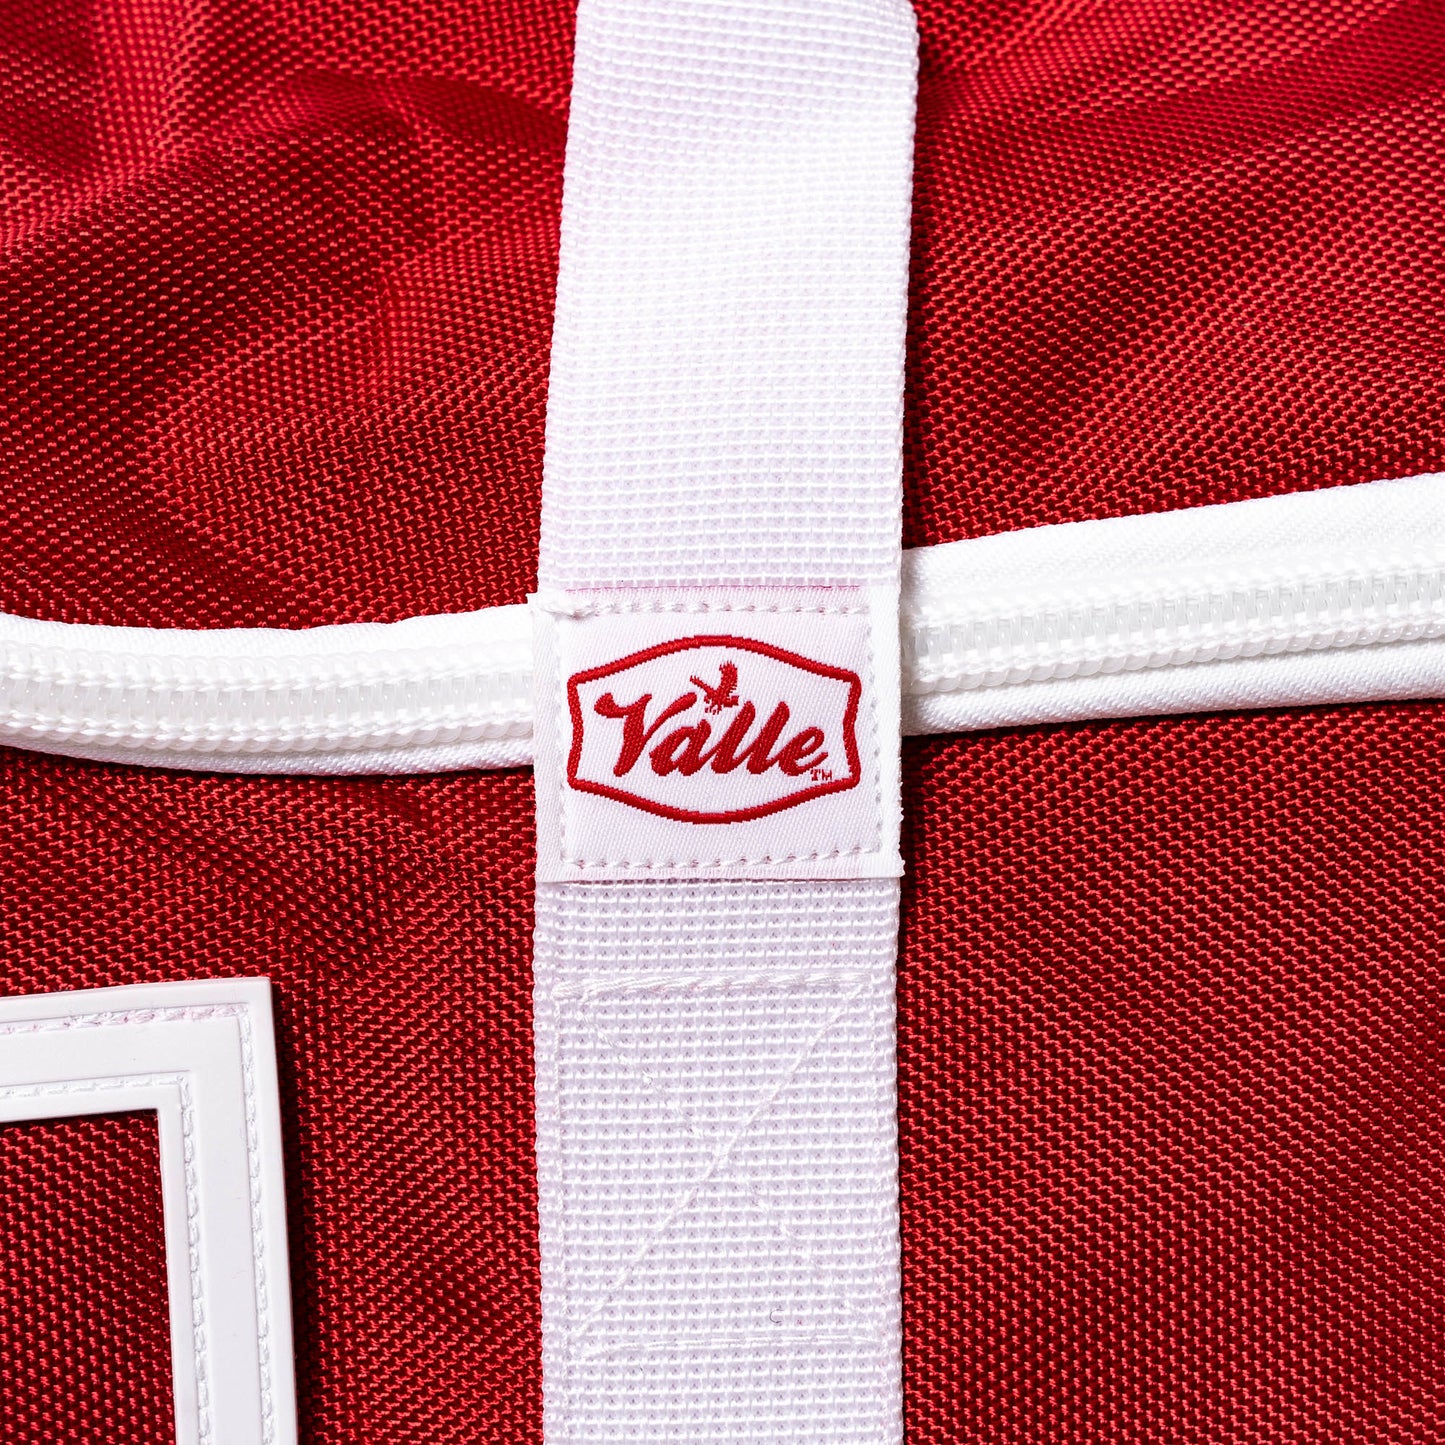 Valle Players Bag